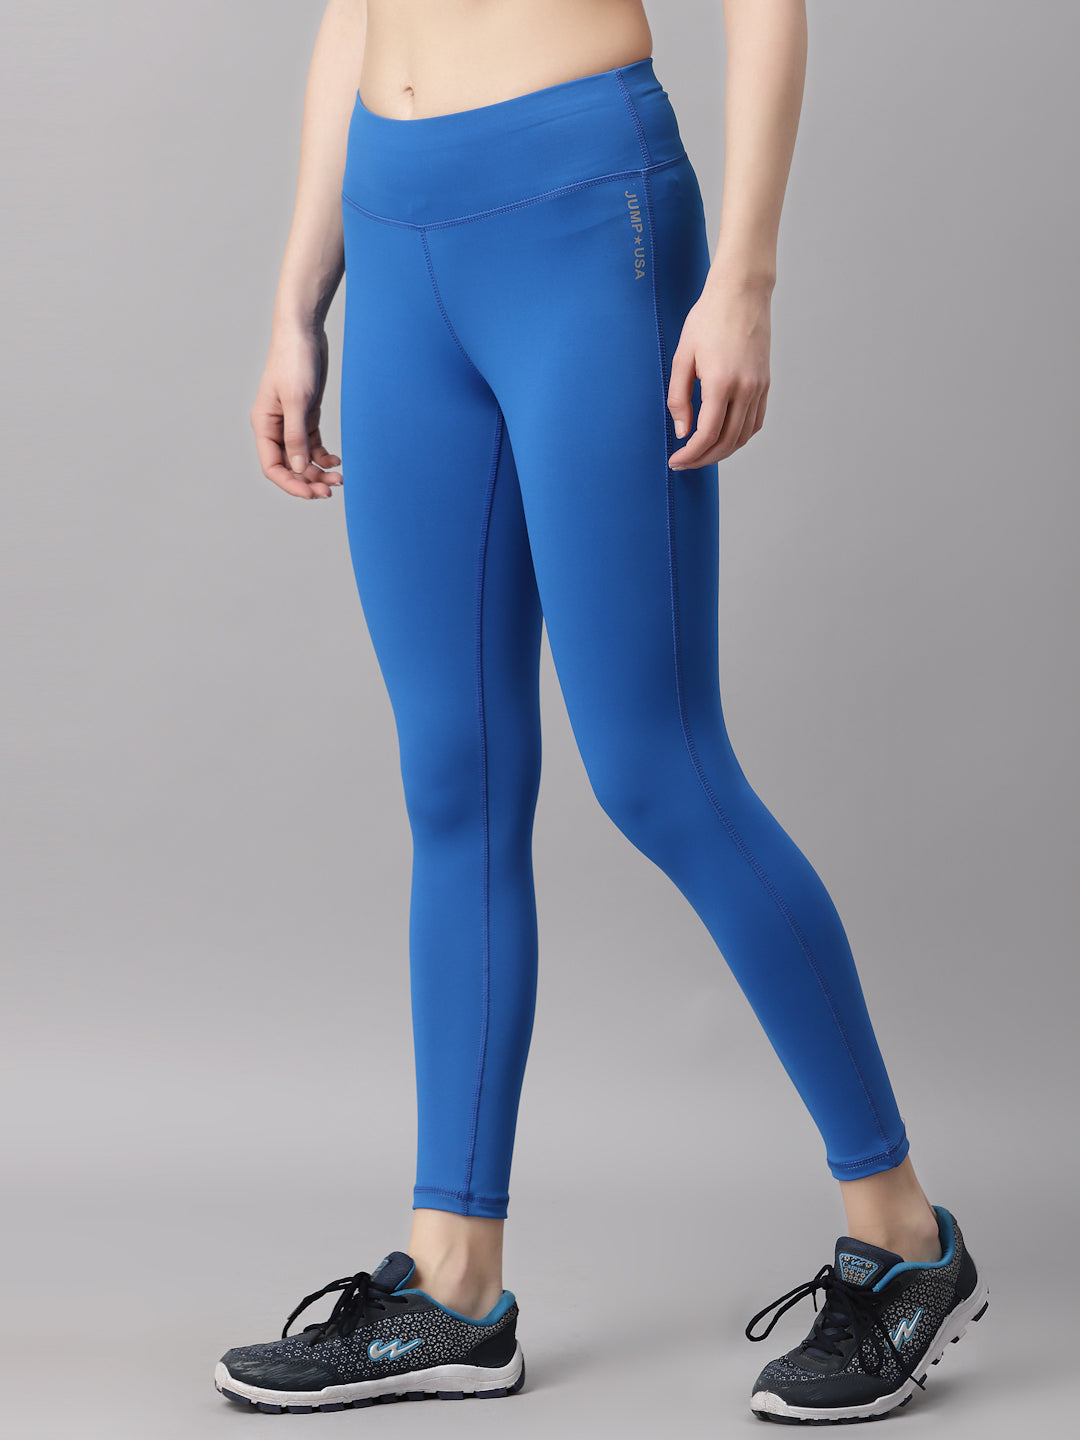 JUMP USA Running Women Royal Blue Solid Rapid-Dry Tights